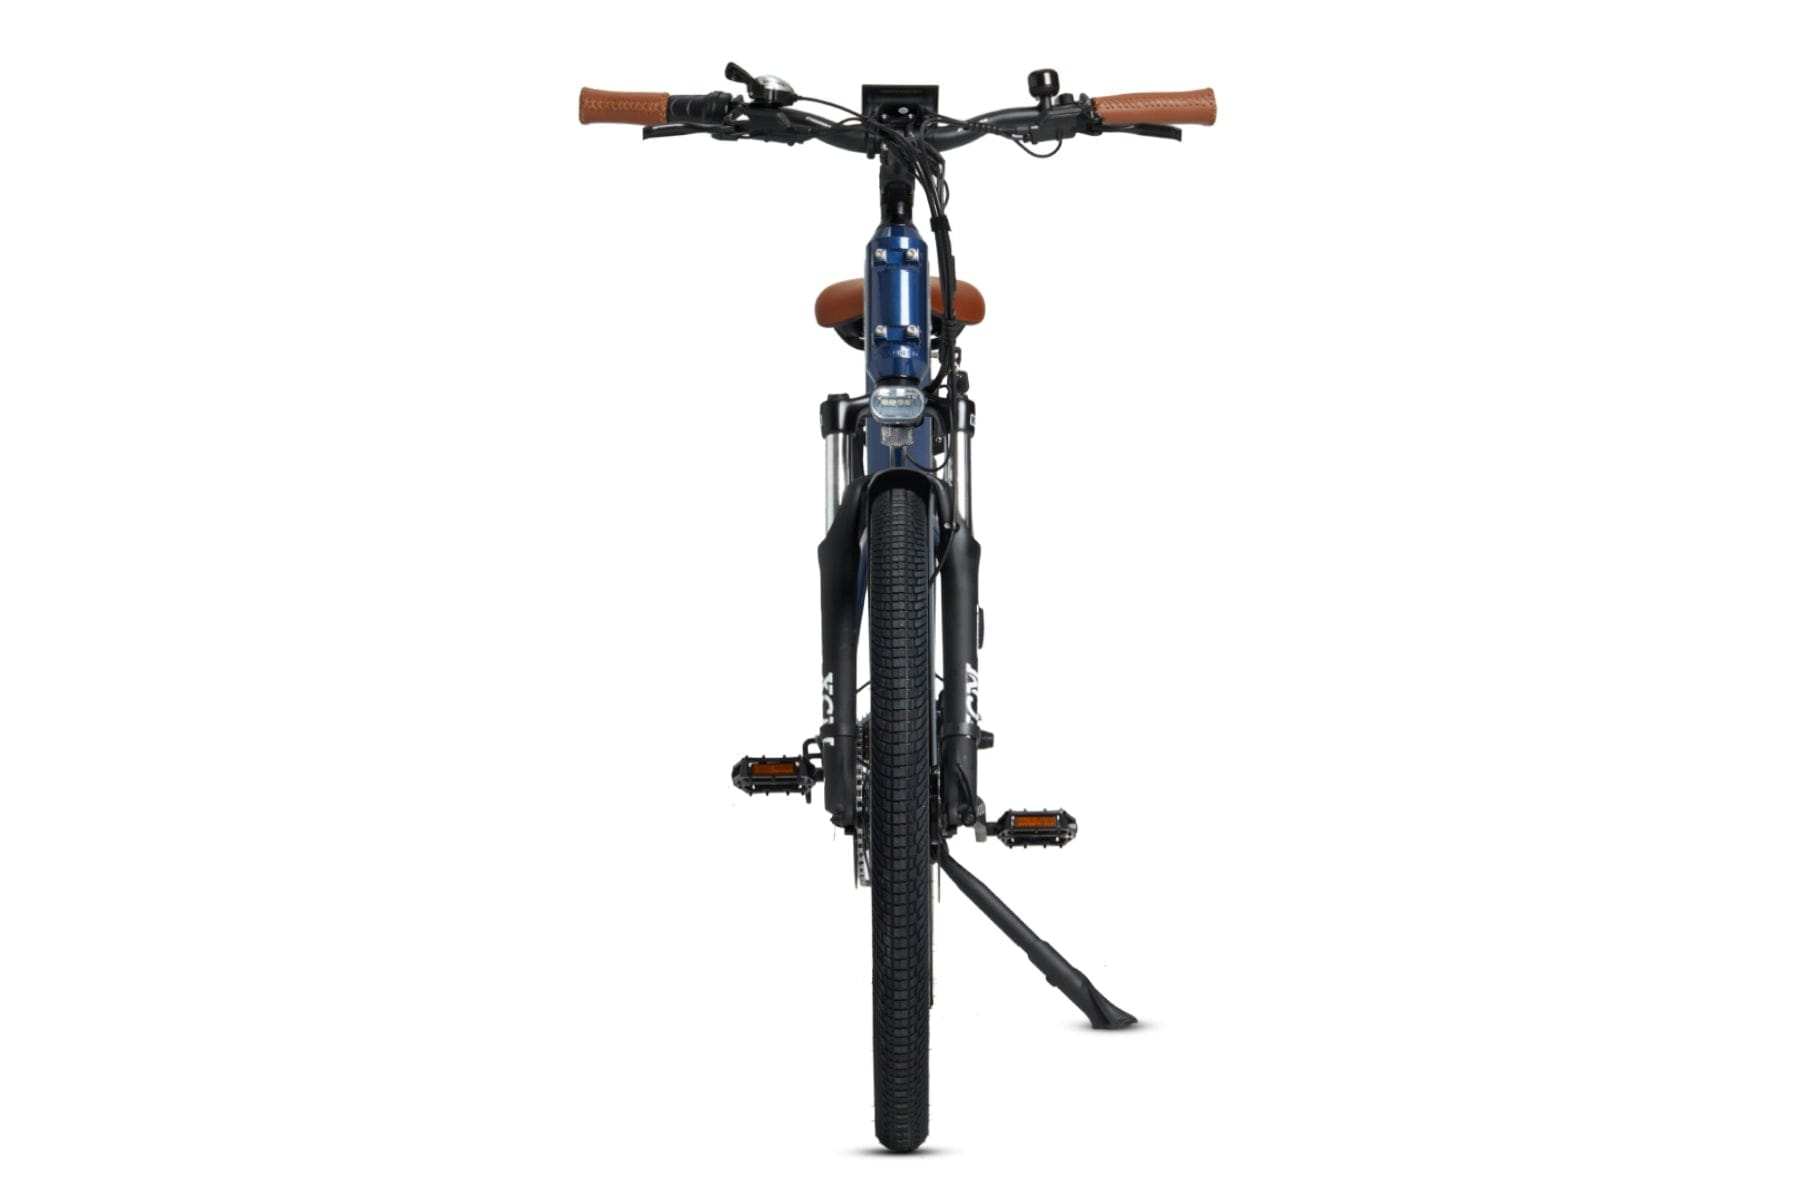 Pacer Commuter Electric Bike